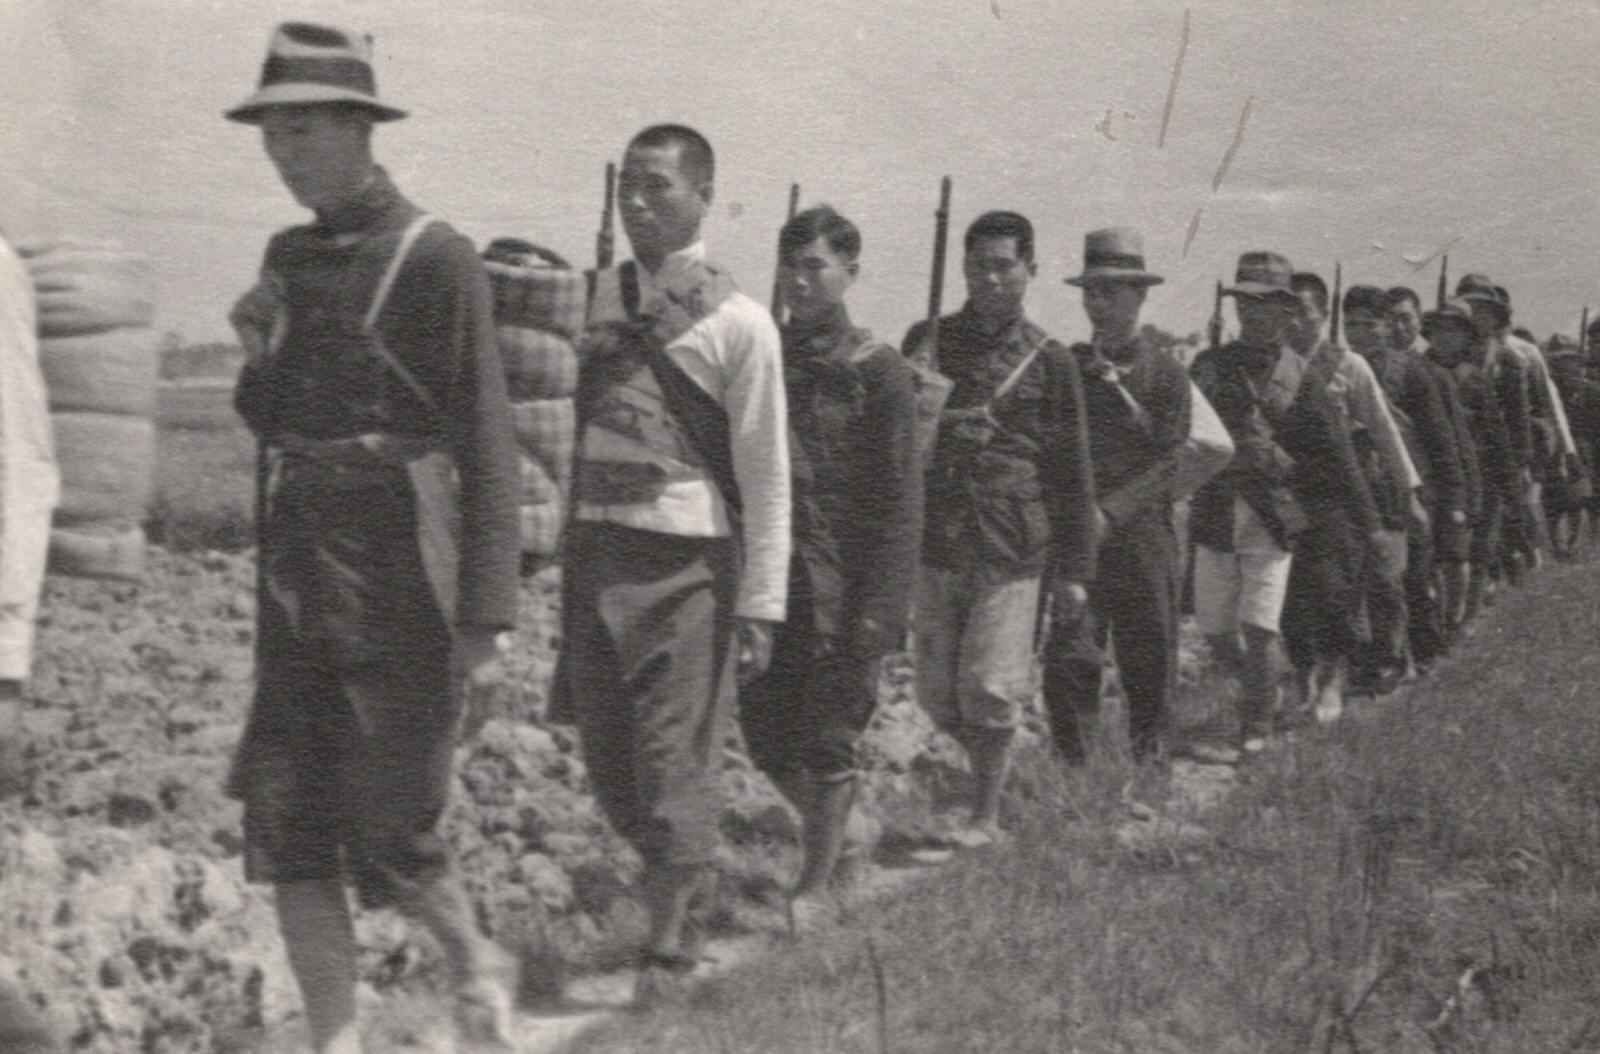 Chinese guerrillas (farmers) who have arisen in the tracks of the Japanese, along the lower Yangtze (Yangzi) River Valley, to fight the invader. They were on their way to join the Communist guerrillas.